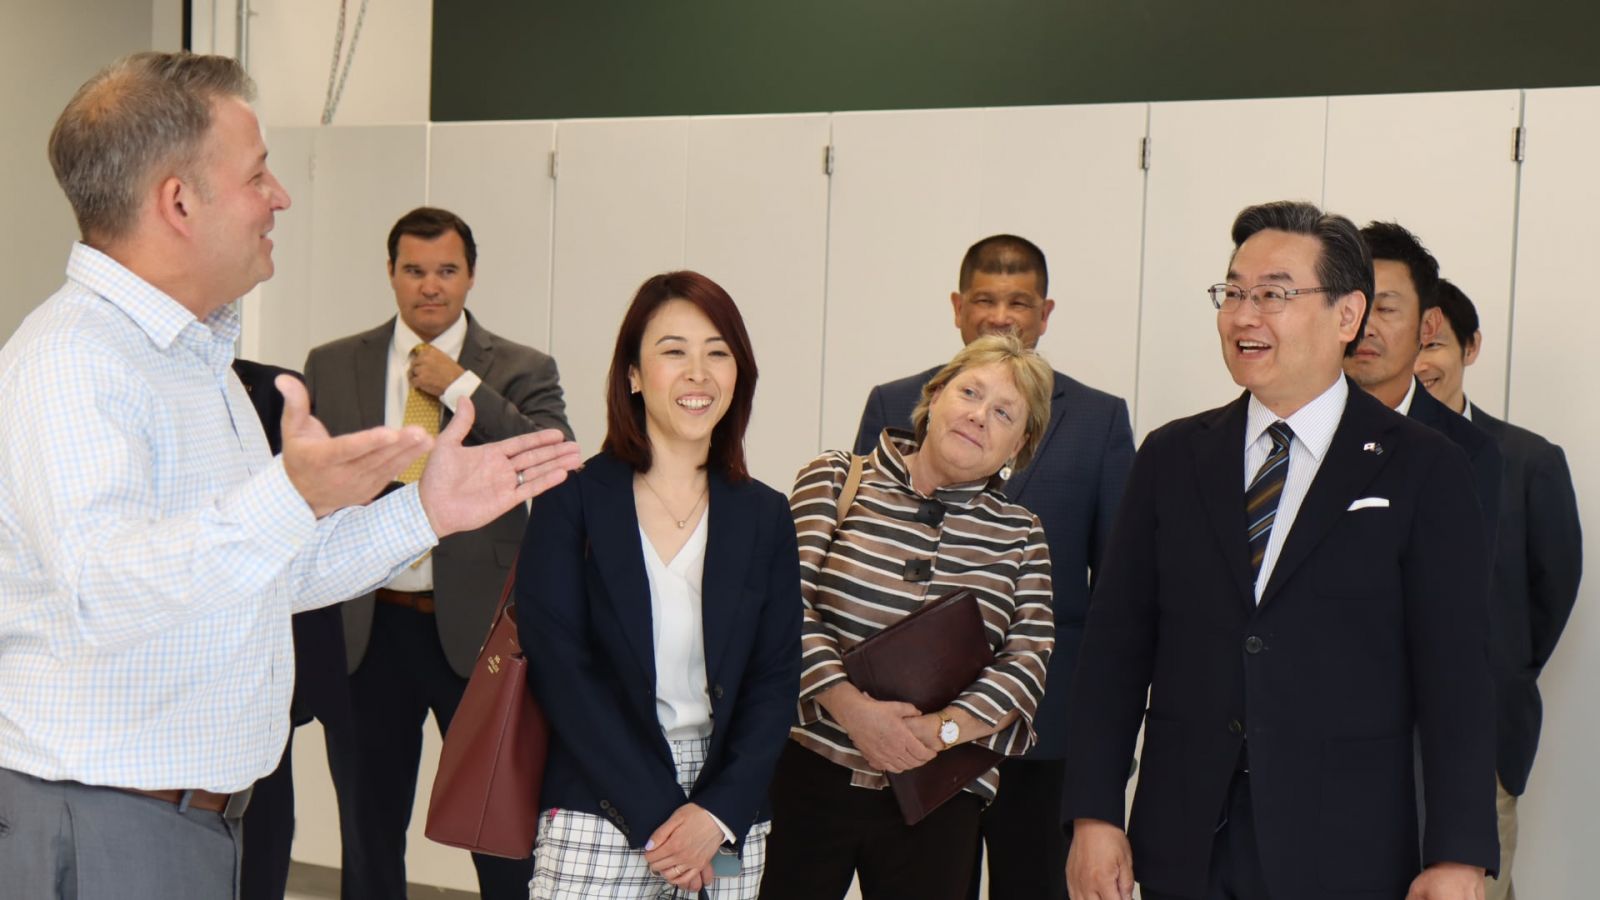 Grant Richards (left), associate professor of practice in Purdue's School of Engineering Technology, describes the new Smart Factory lab to Consul-General Hiroshi Tajima (right), the chief executive of the Japanese Consul to the Midwest. (Purdue University photo/John O'Malley)